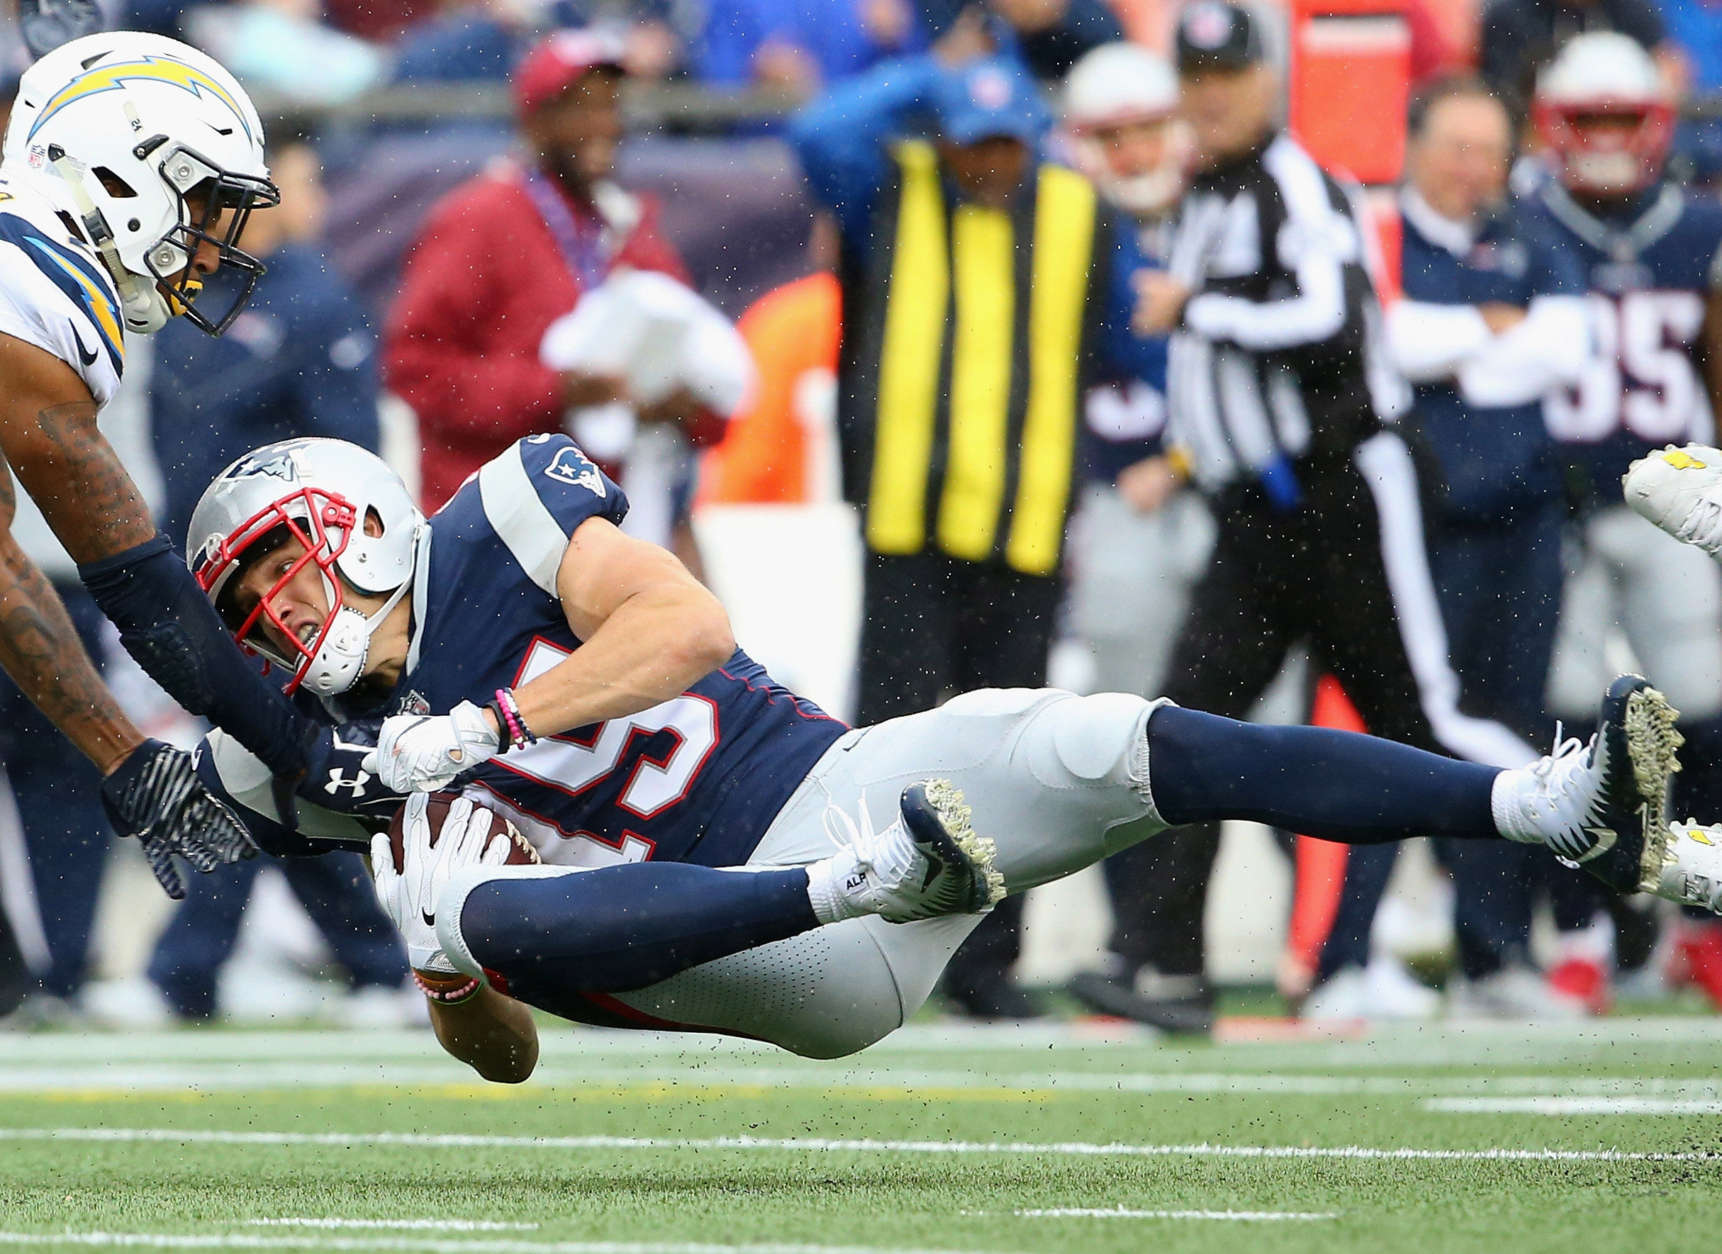 FOXBORO, MA - OCTOBER 29: Chris Hogan #15 of the New England Patriots catches a pass during the third quarter of a game against the Los Angeles Chargers at Gillette Stadium on October 29, 2017 in Foxboro, Massachusetts. (Photo by Maddie Meyer/Getty Images)